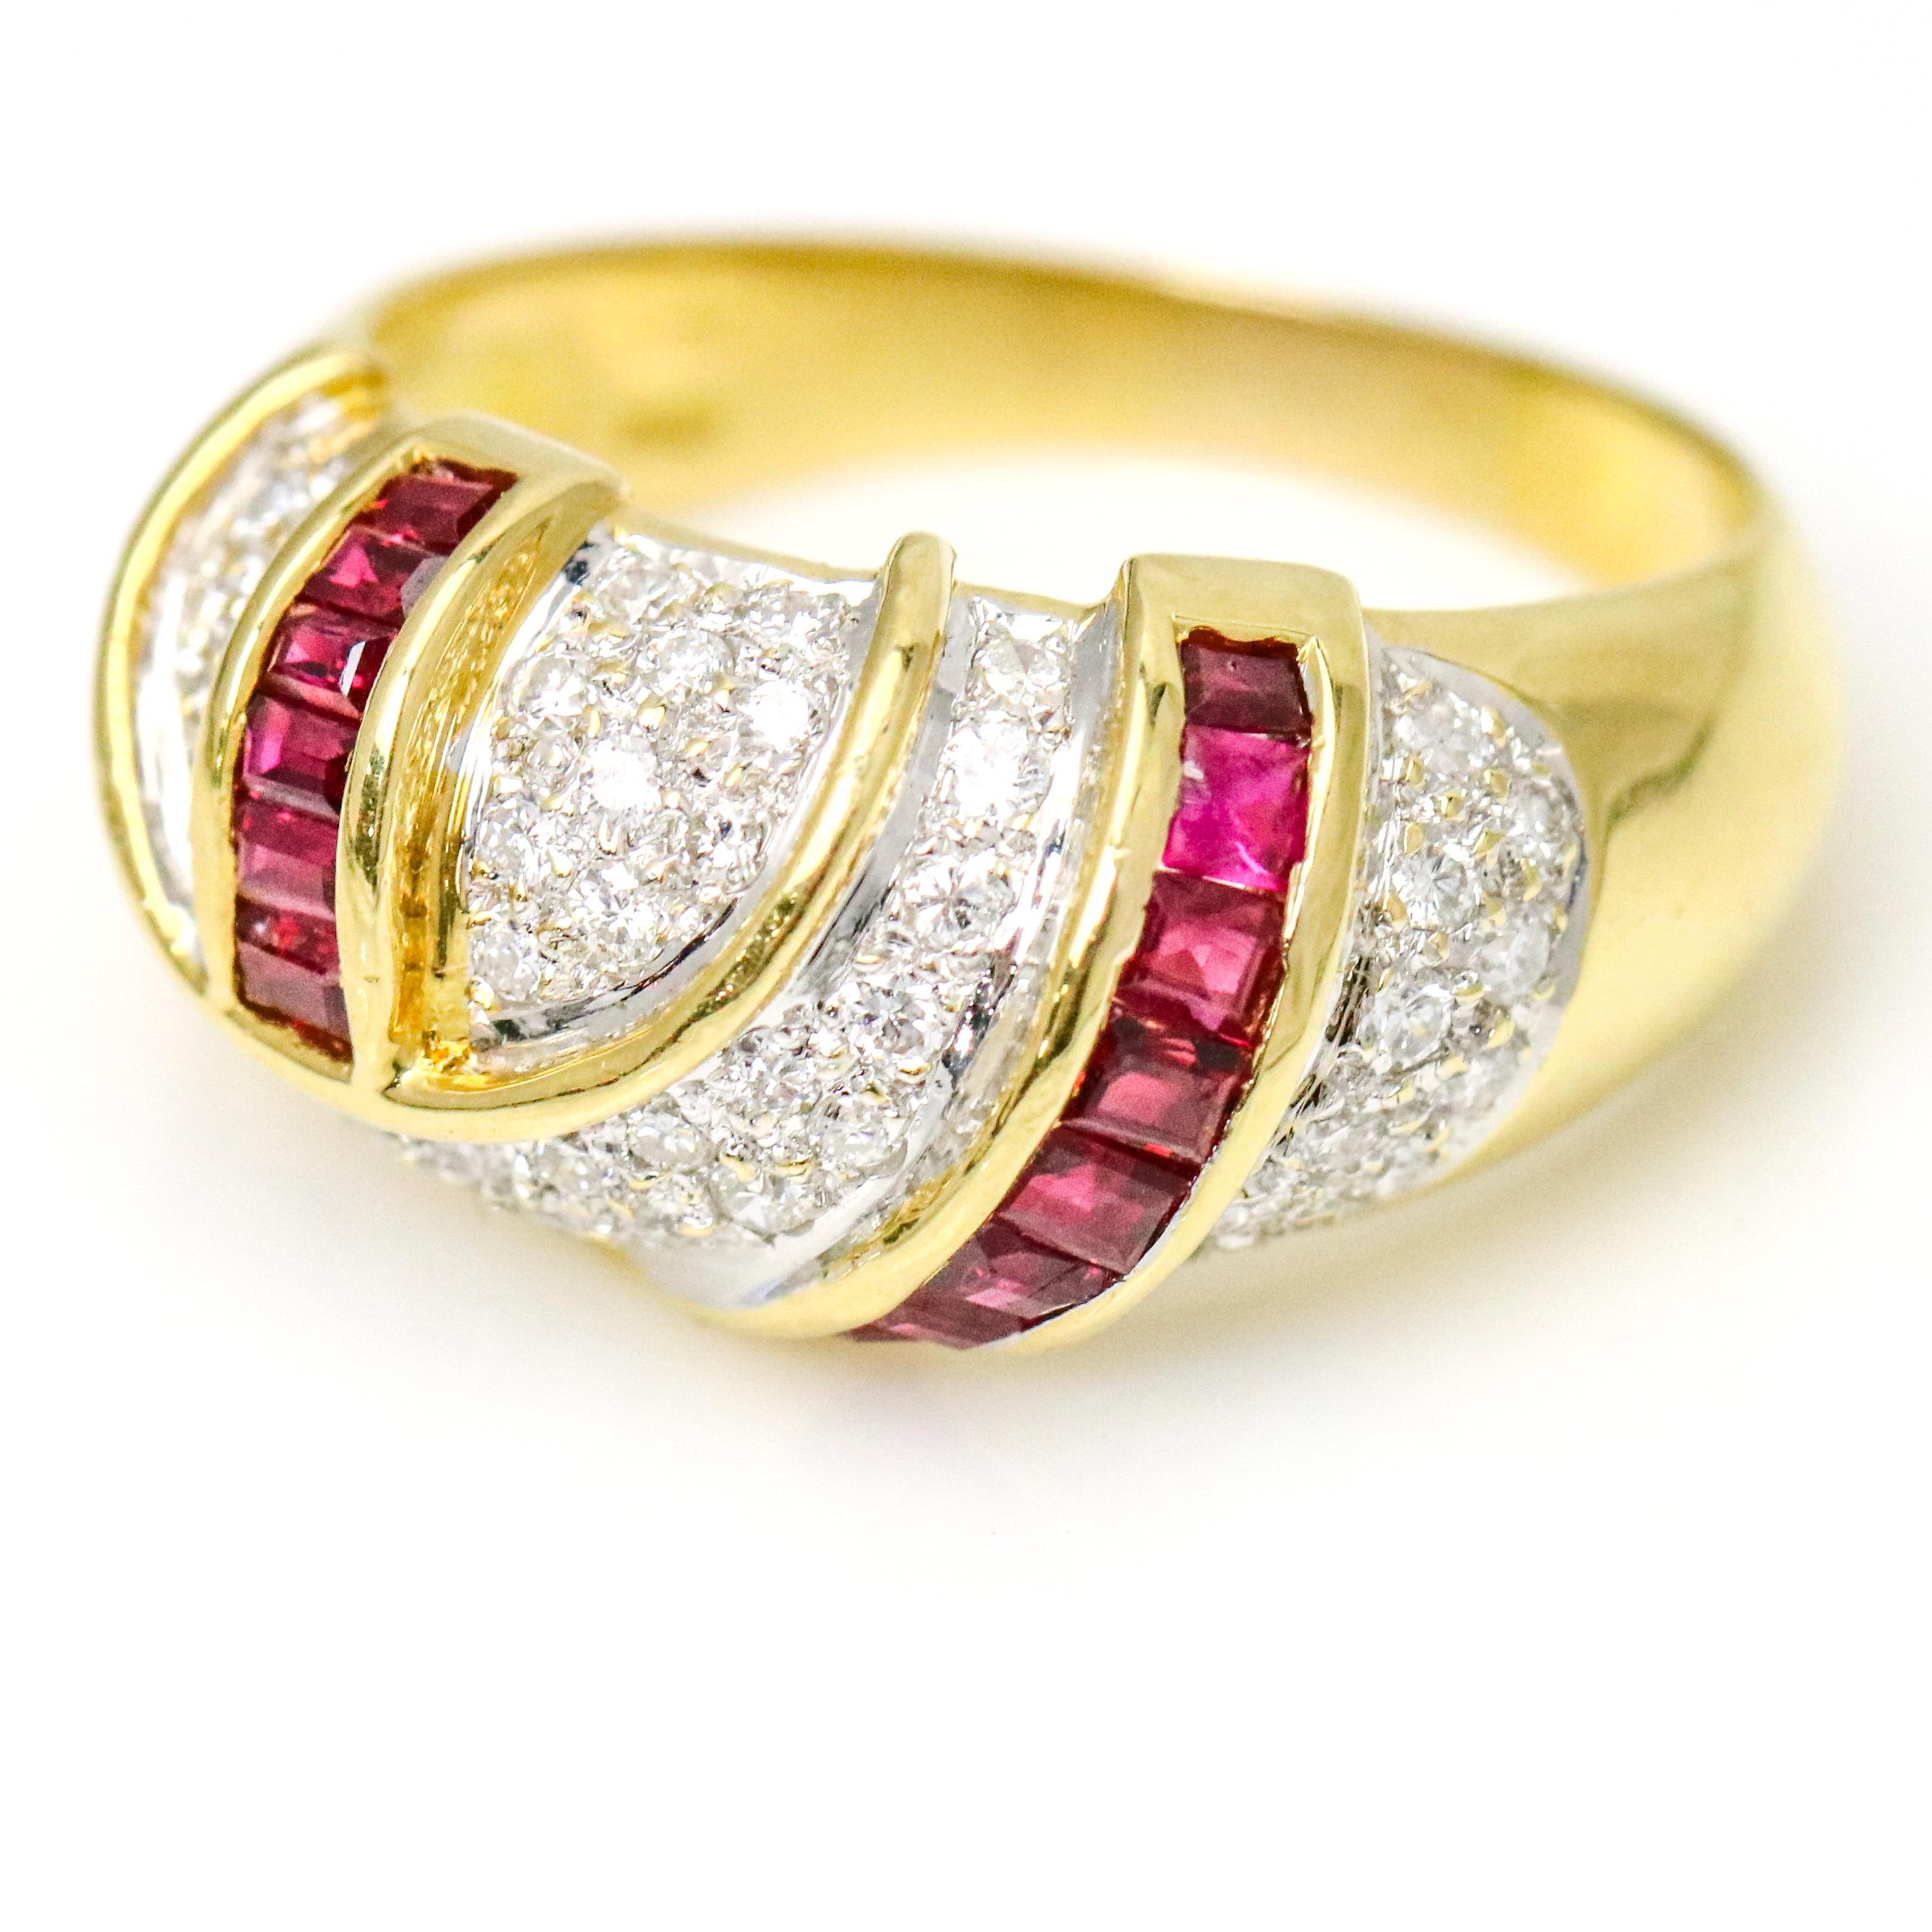 Ruby and Diamond band in 18 karat yellow gold. Size 9.5. The ring is pave set with diamonds and channel set with 14 baguette cut rubies. The estimated total carat weight of diamonds is, 1ct. Approximate carat weight of rubies, .80 carats.

Weight,